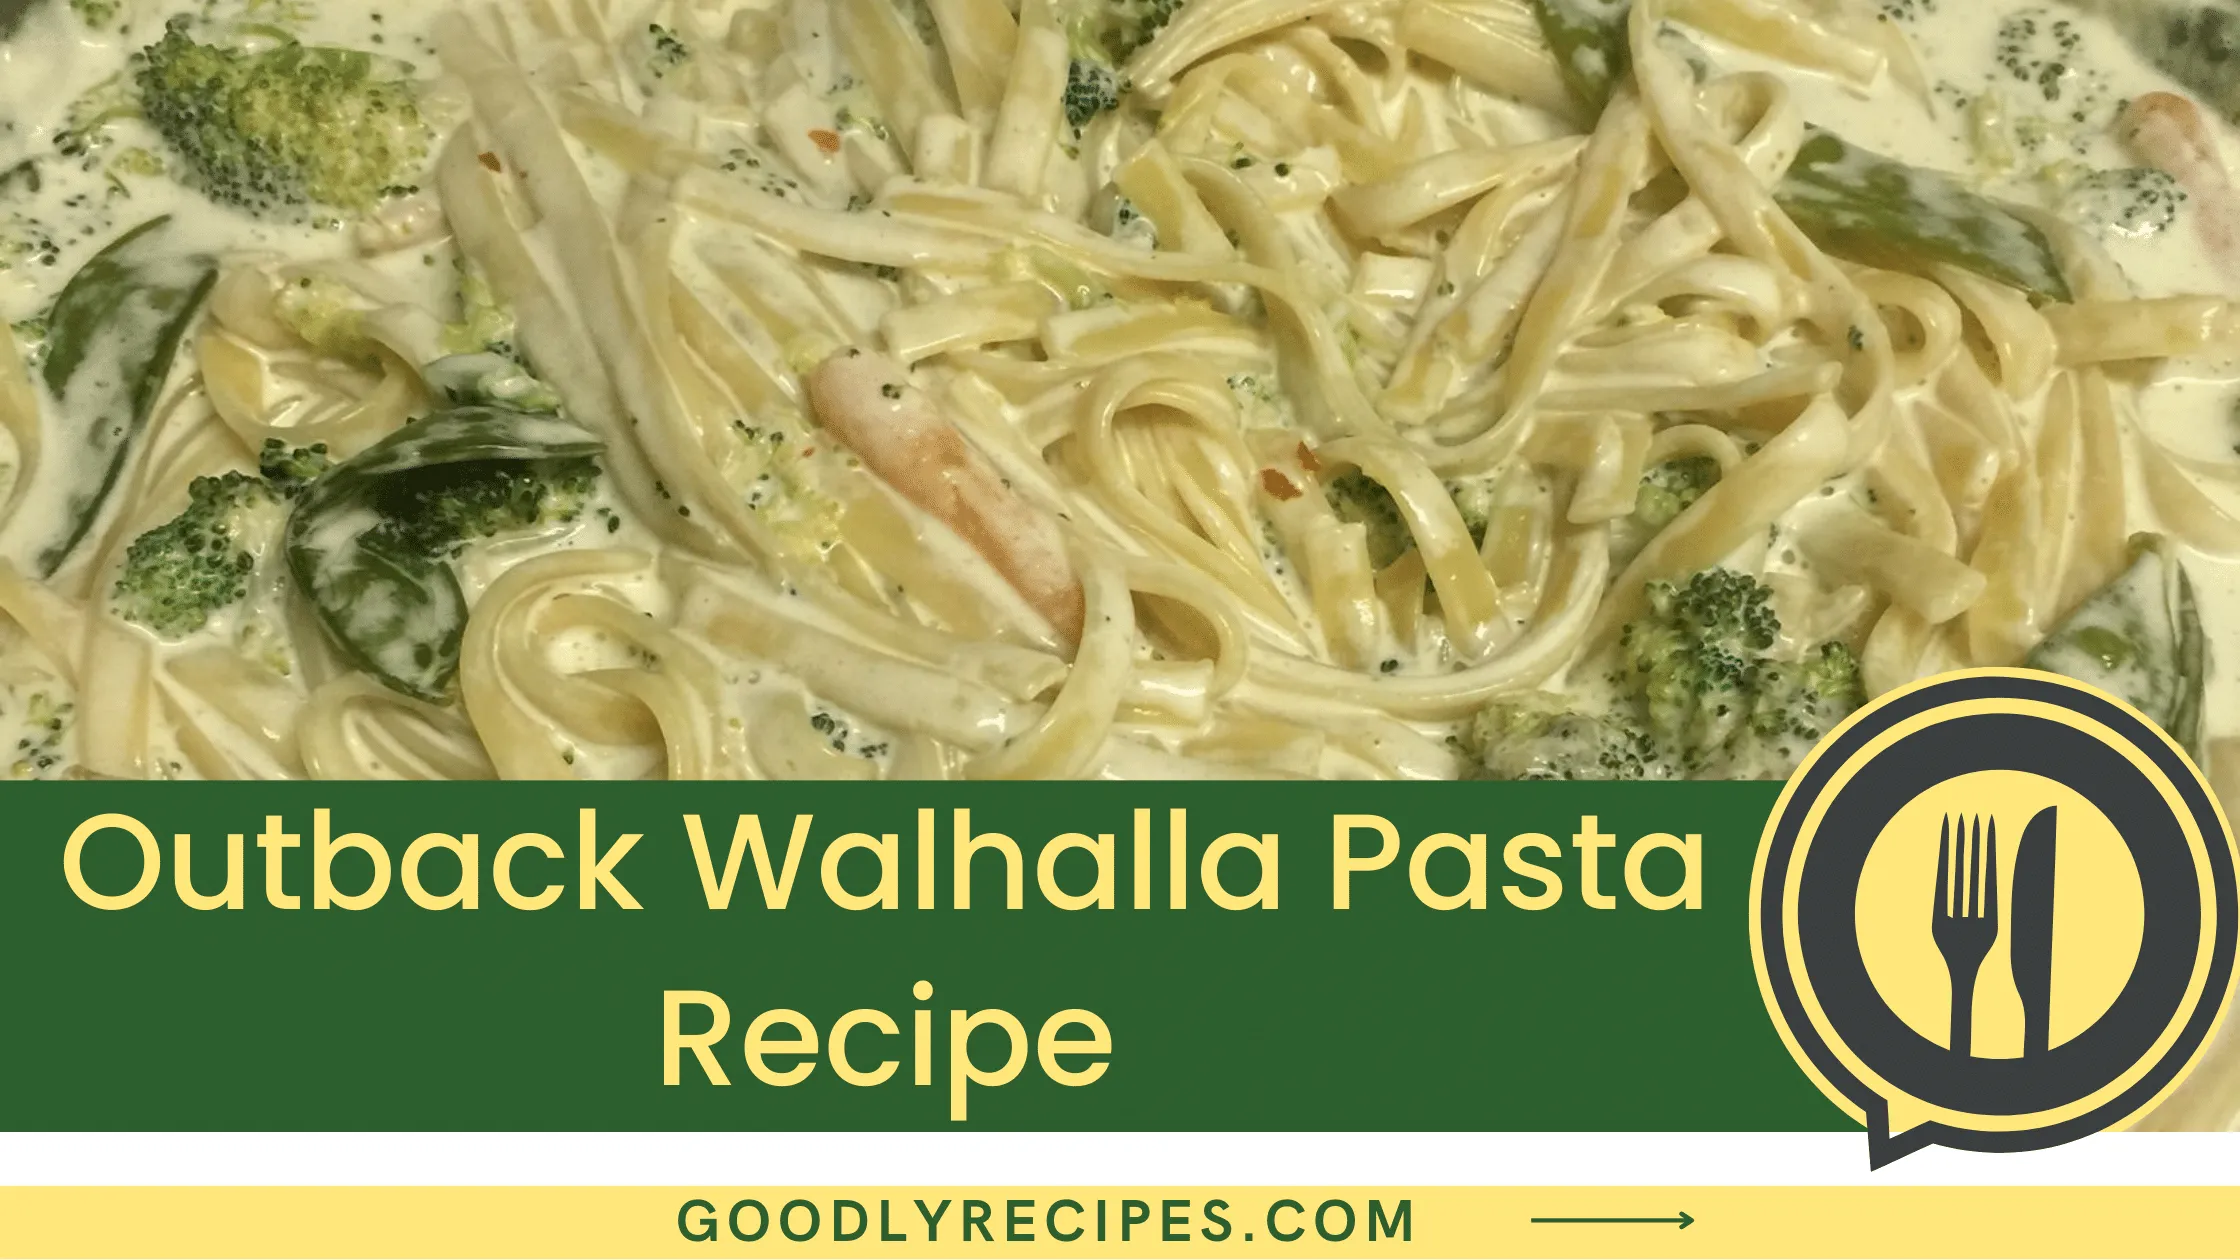 What is Outback Walhalla Pasta?